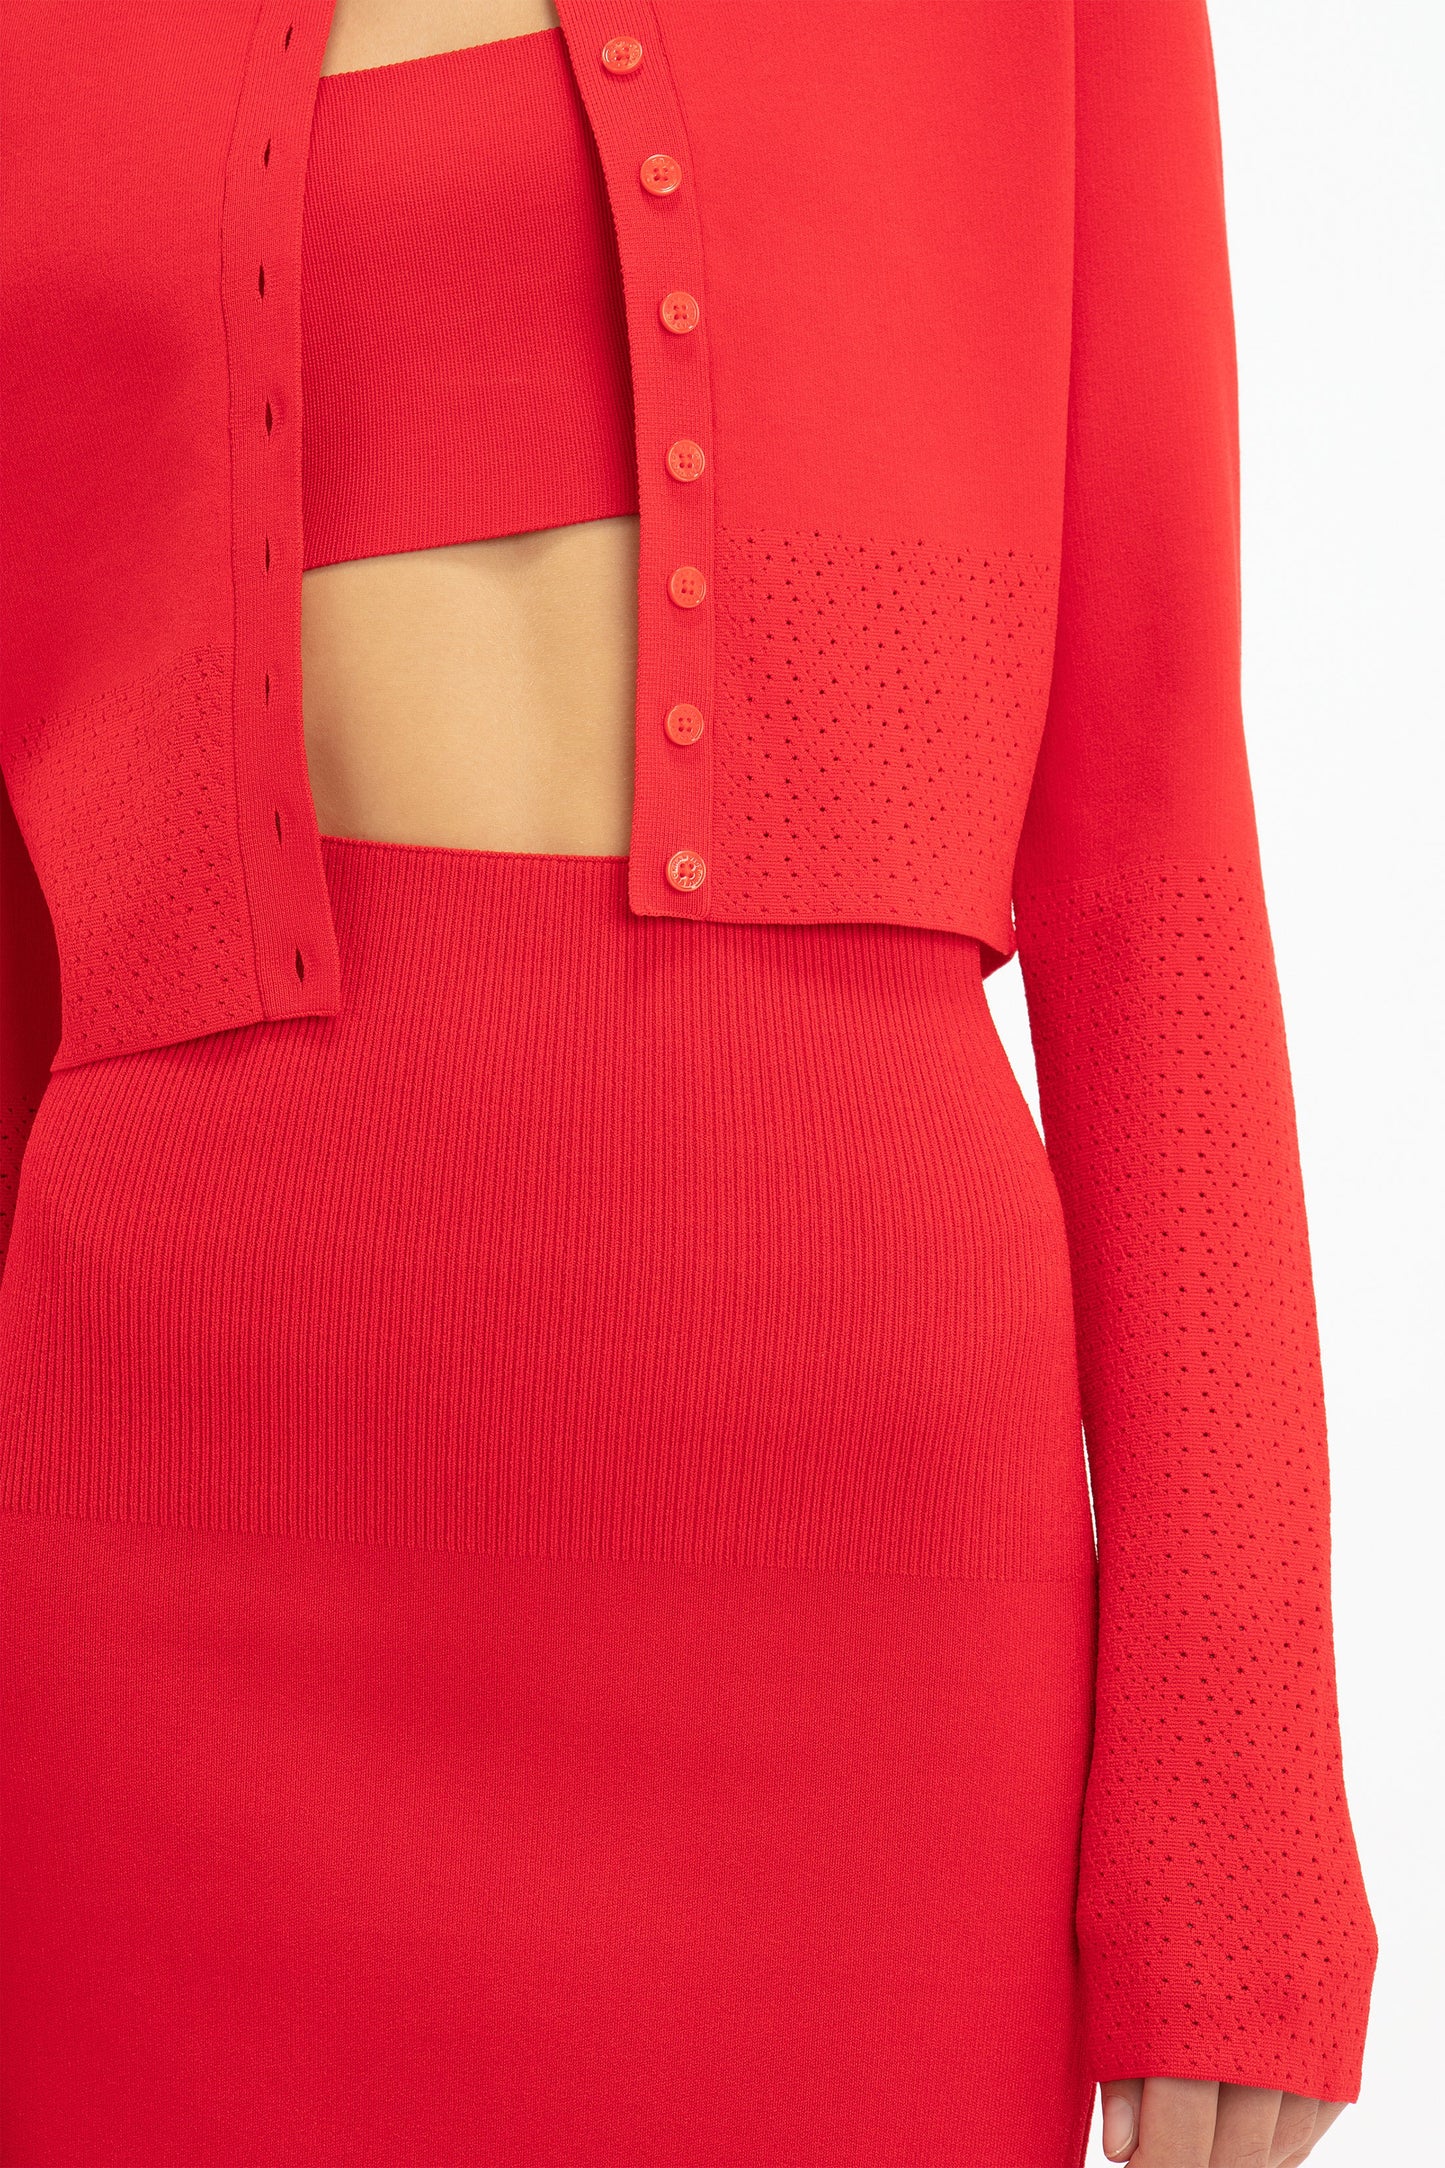 VB Body Cropped Fitted Cardigan in Red